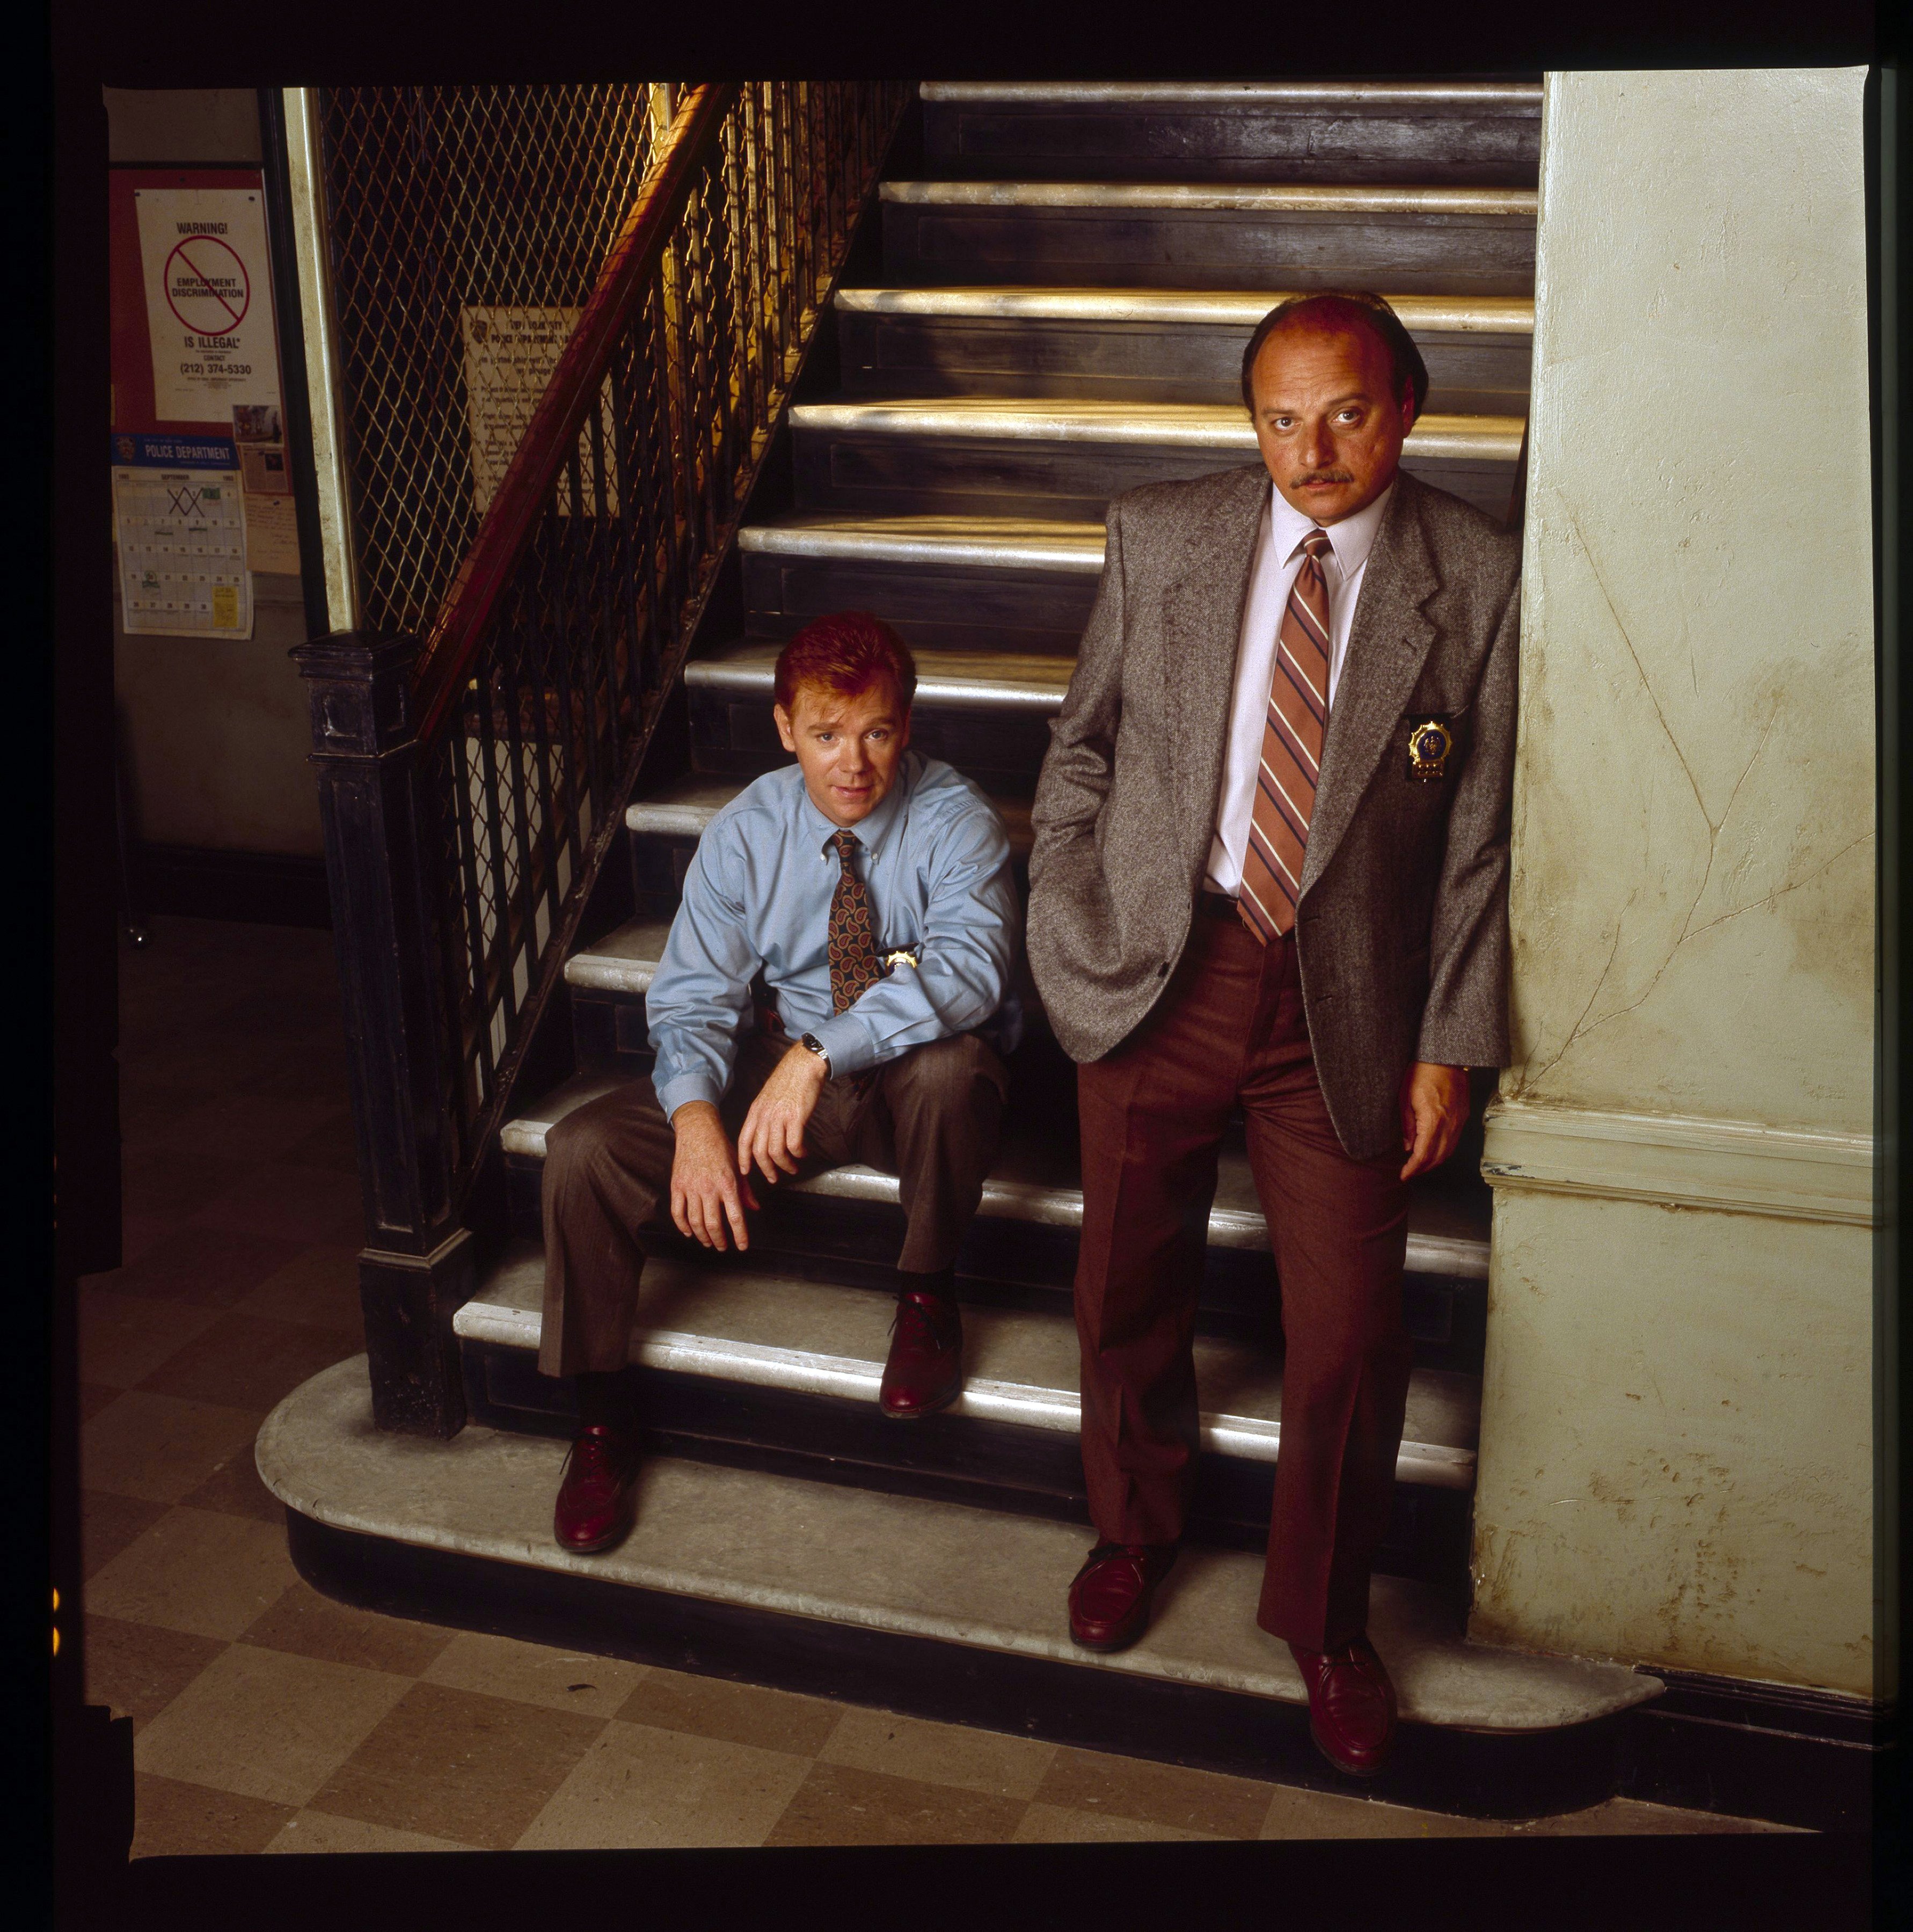 Dennis Franz and David Caruso in the pilot of "NYPD Blue" on April 19, 1993. | Source: Getty Images